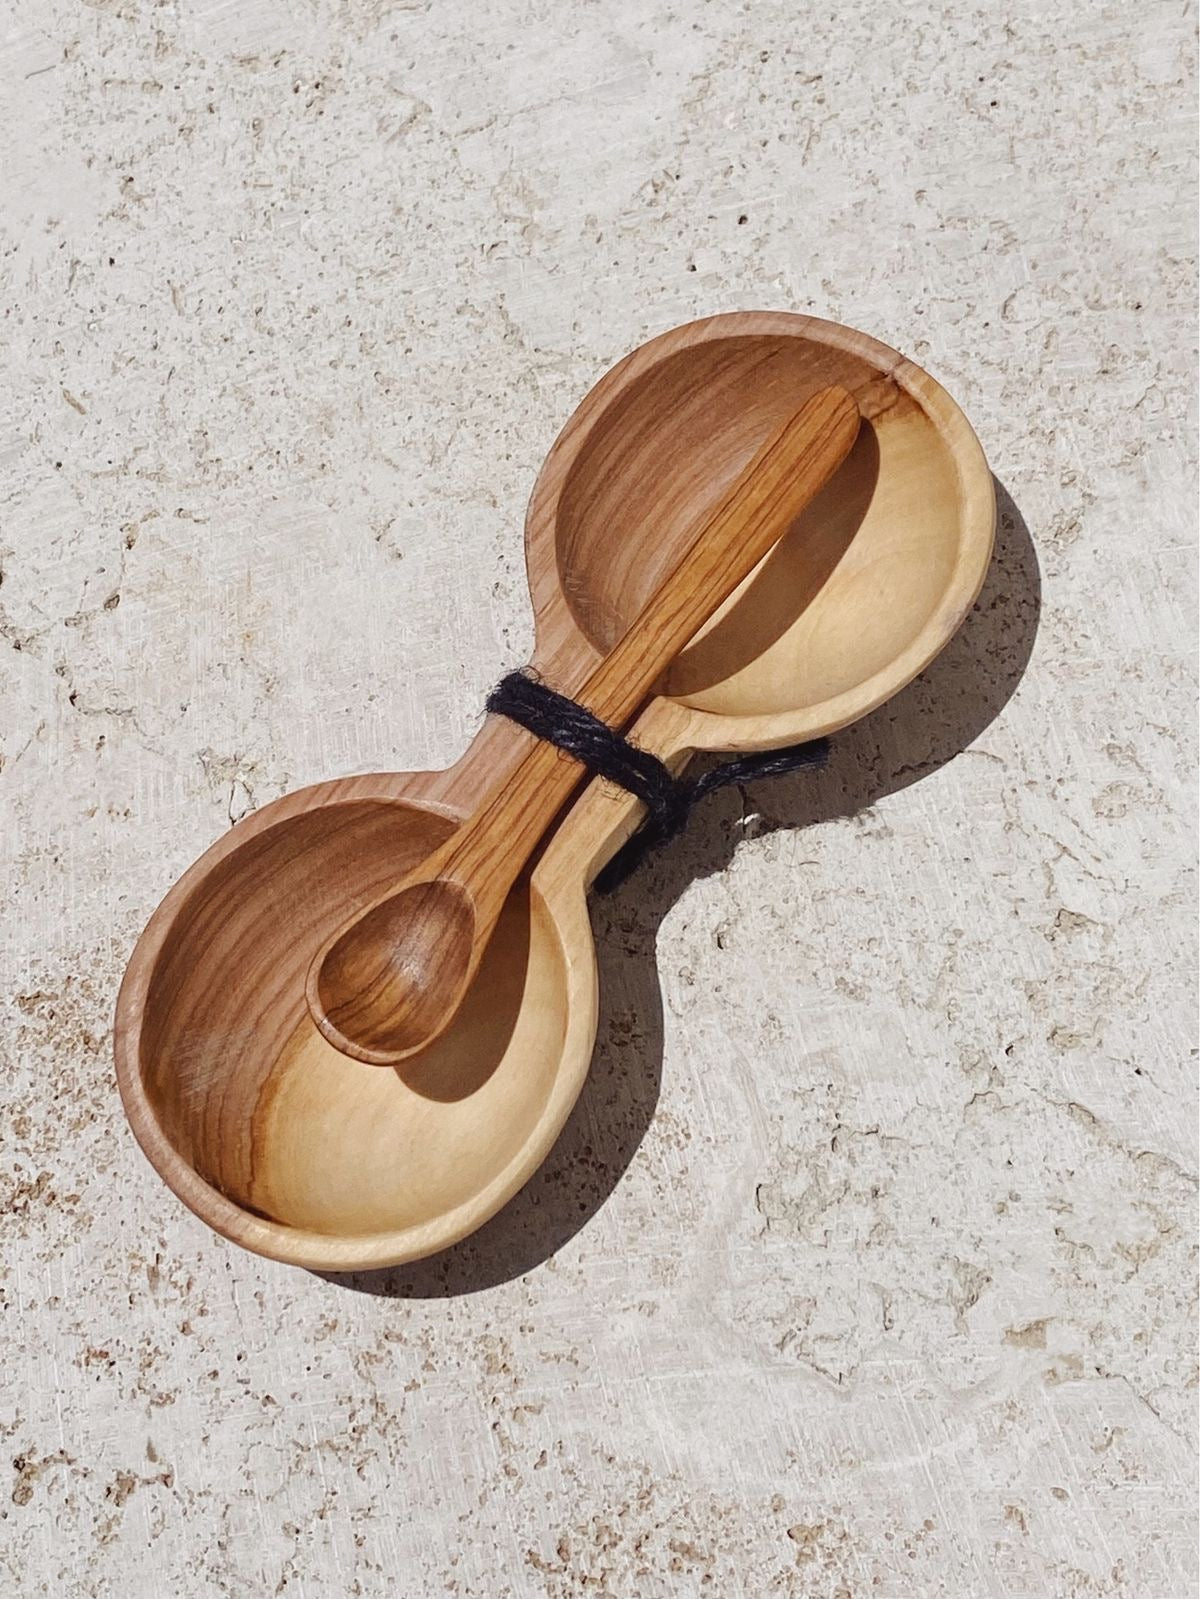 olive wood double spice bowl with spoon